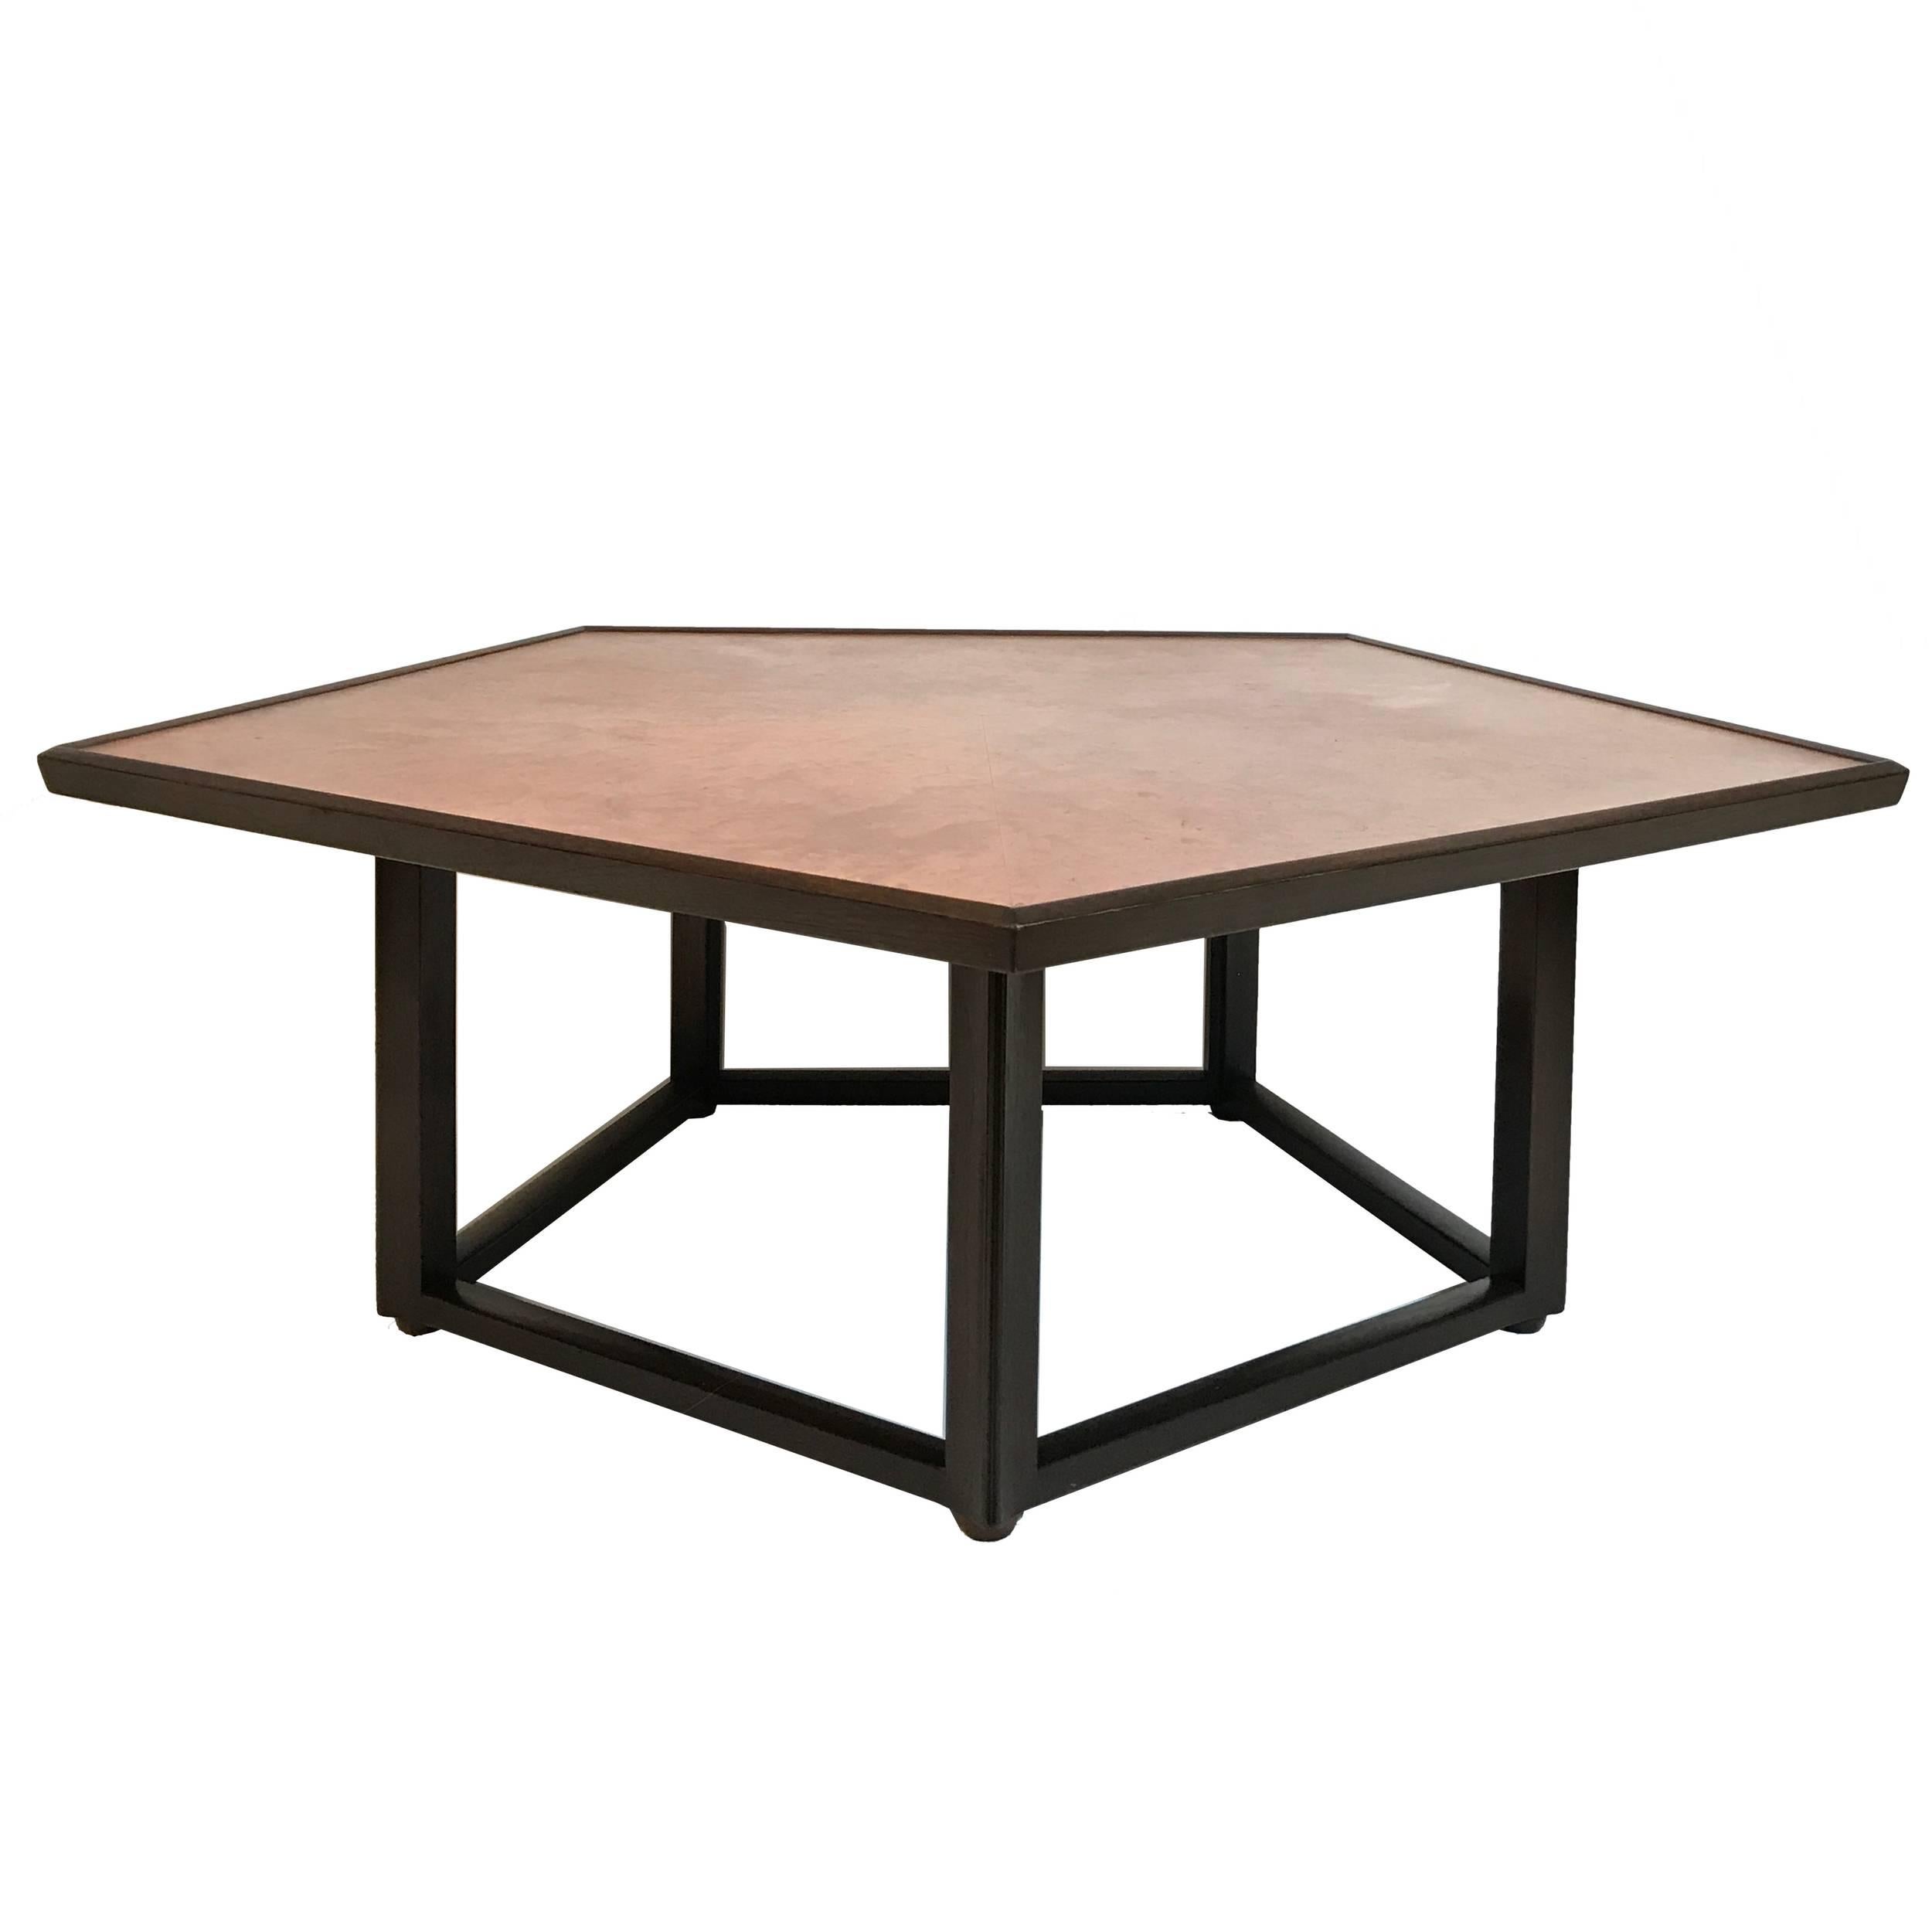 Gorgeous center Pentagon shaped table by Dunbar. Stunning design constructed of three types of exotic wood.